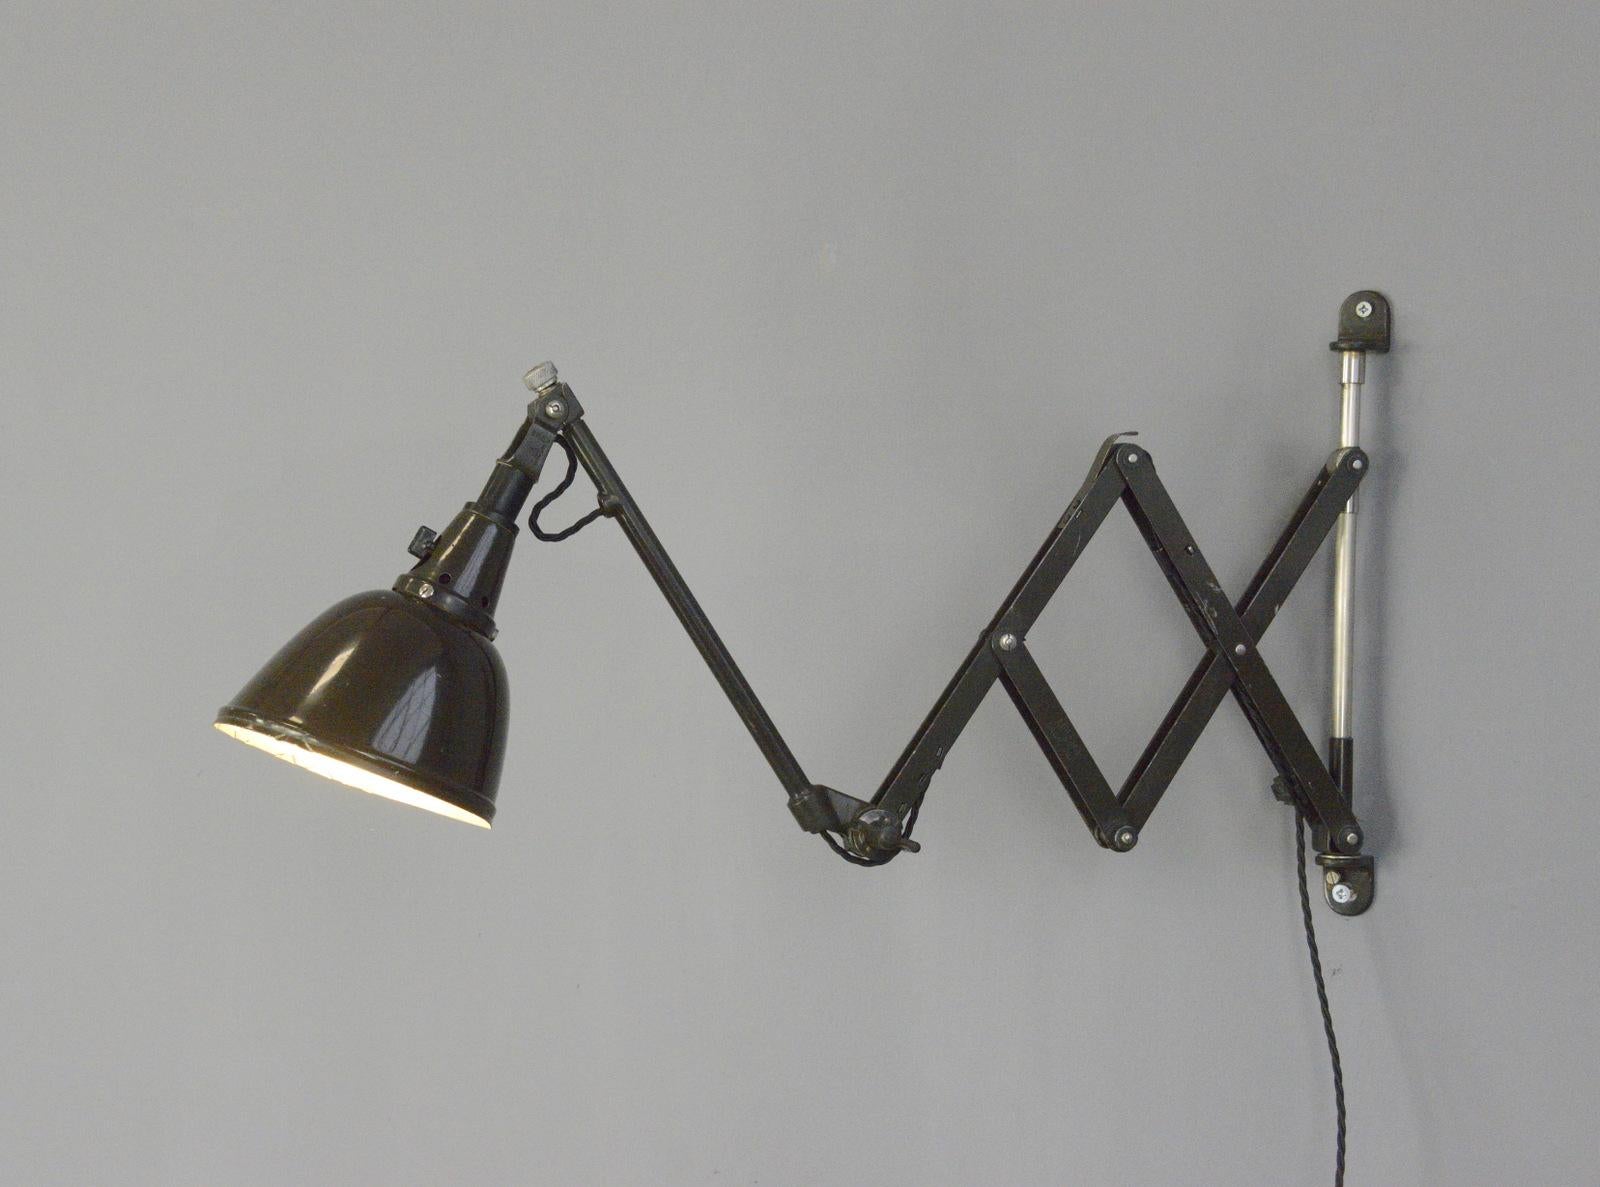 Curt Fischer Midgard scissor lamp circa 1930s

- Extendable scissor mechanism
- Original brown paint
- Aluminium shade
- Takes E27 fitting bulbs
- On/Off Switch on the cable
- Designed by Curt Fischer
- Produced by Midgard, Auma
- German ~